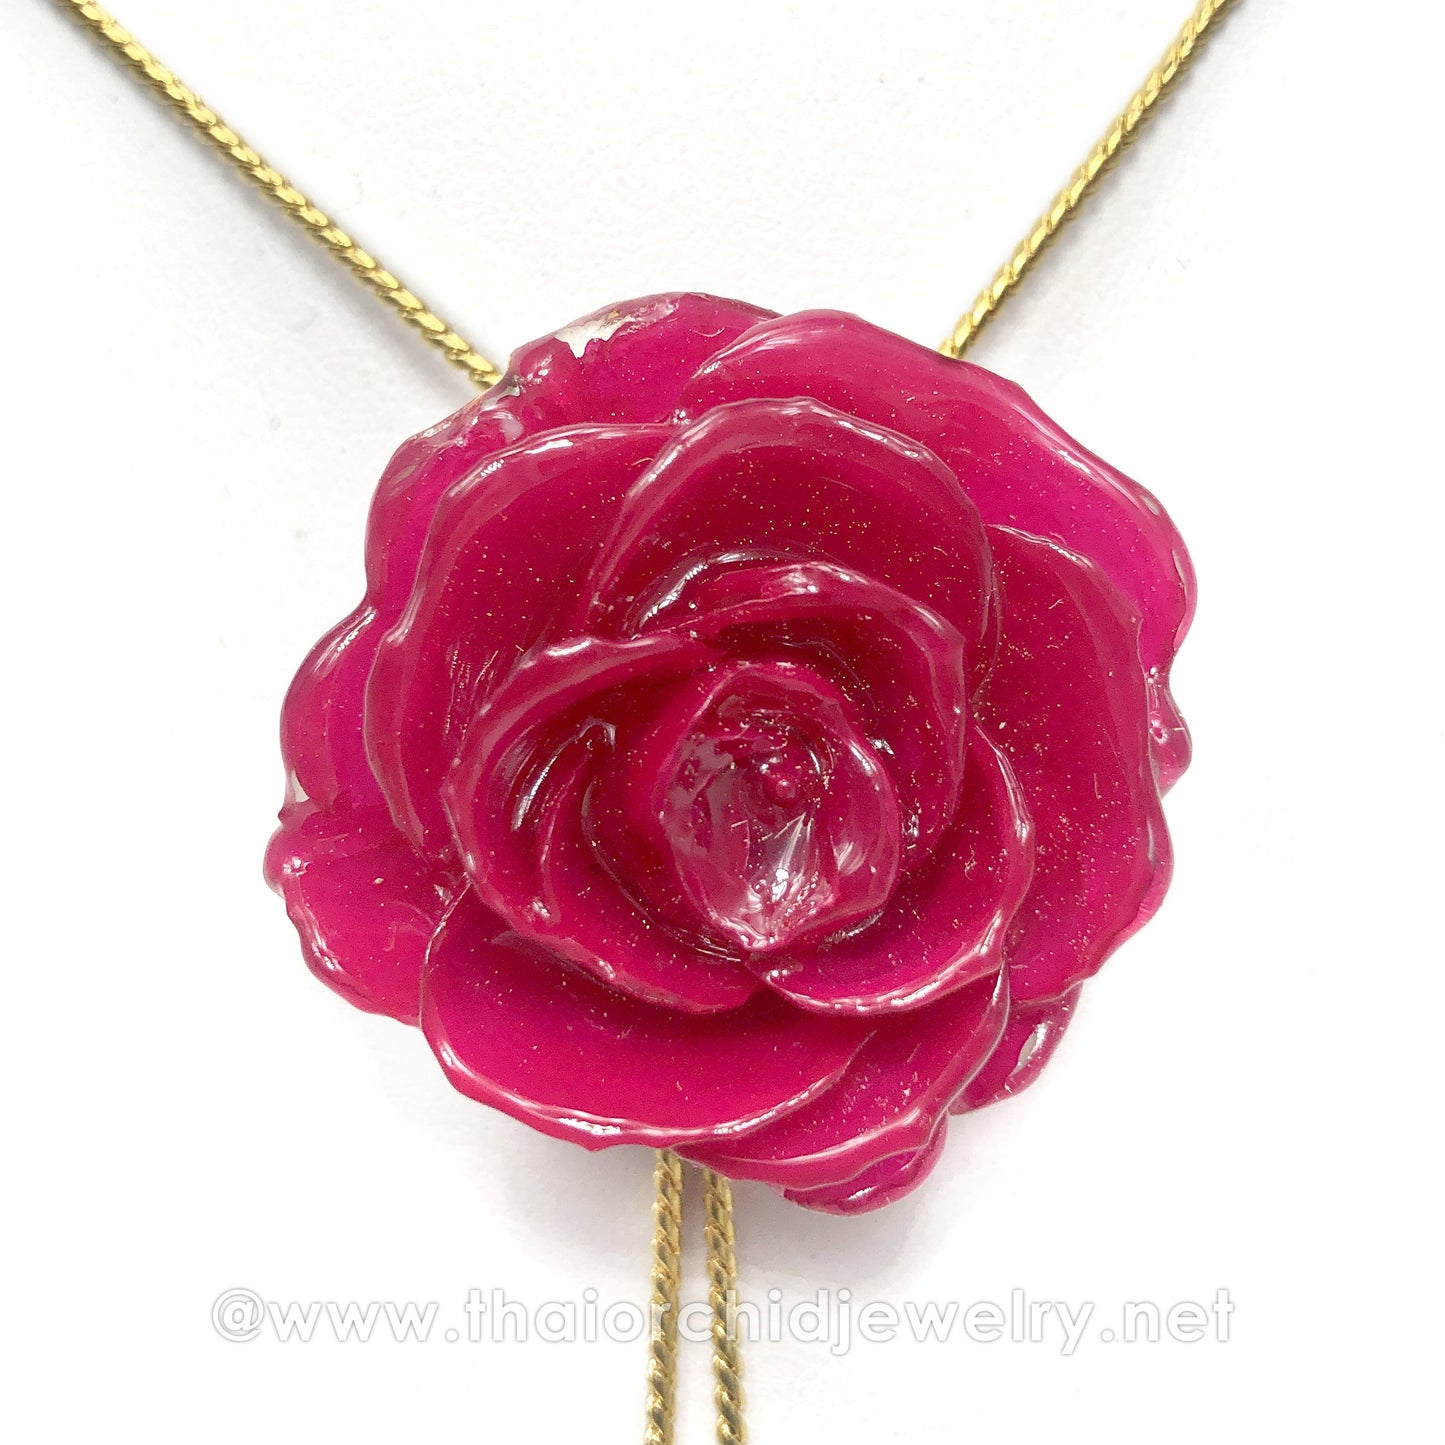 Mini Rose Mini 1.5-2.25 inch Pendant Necklace 18 inch Gold Plated 24K (Pink)